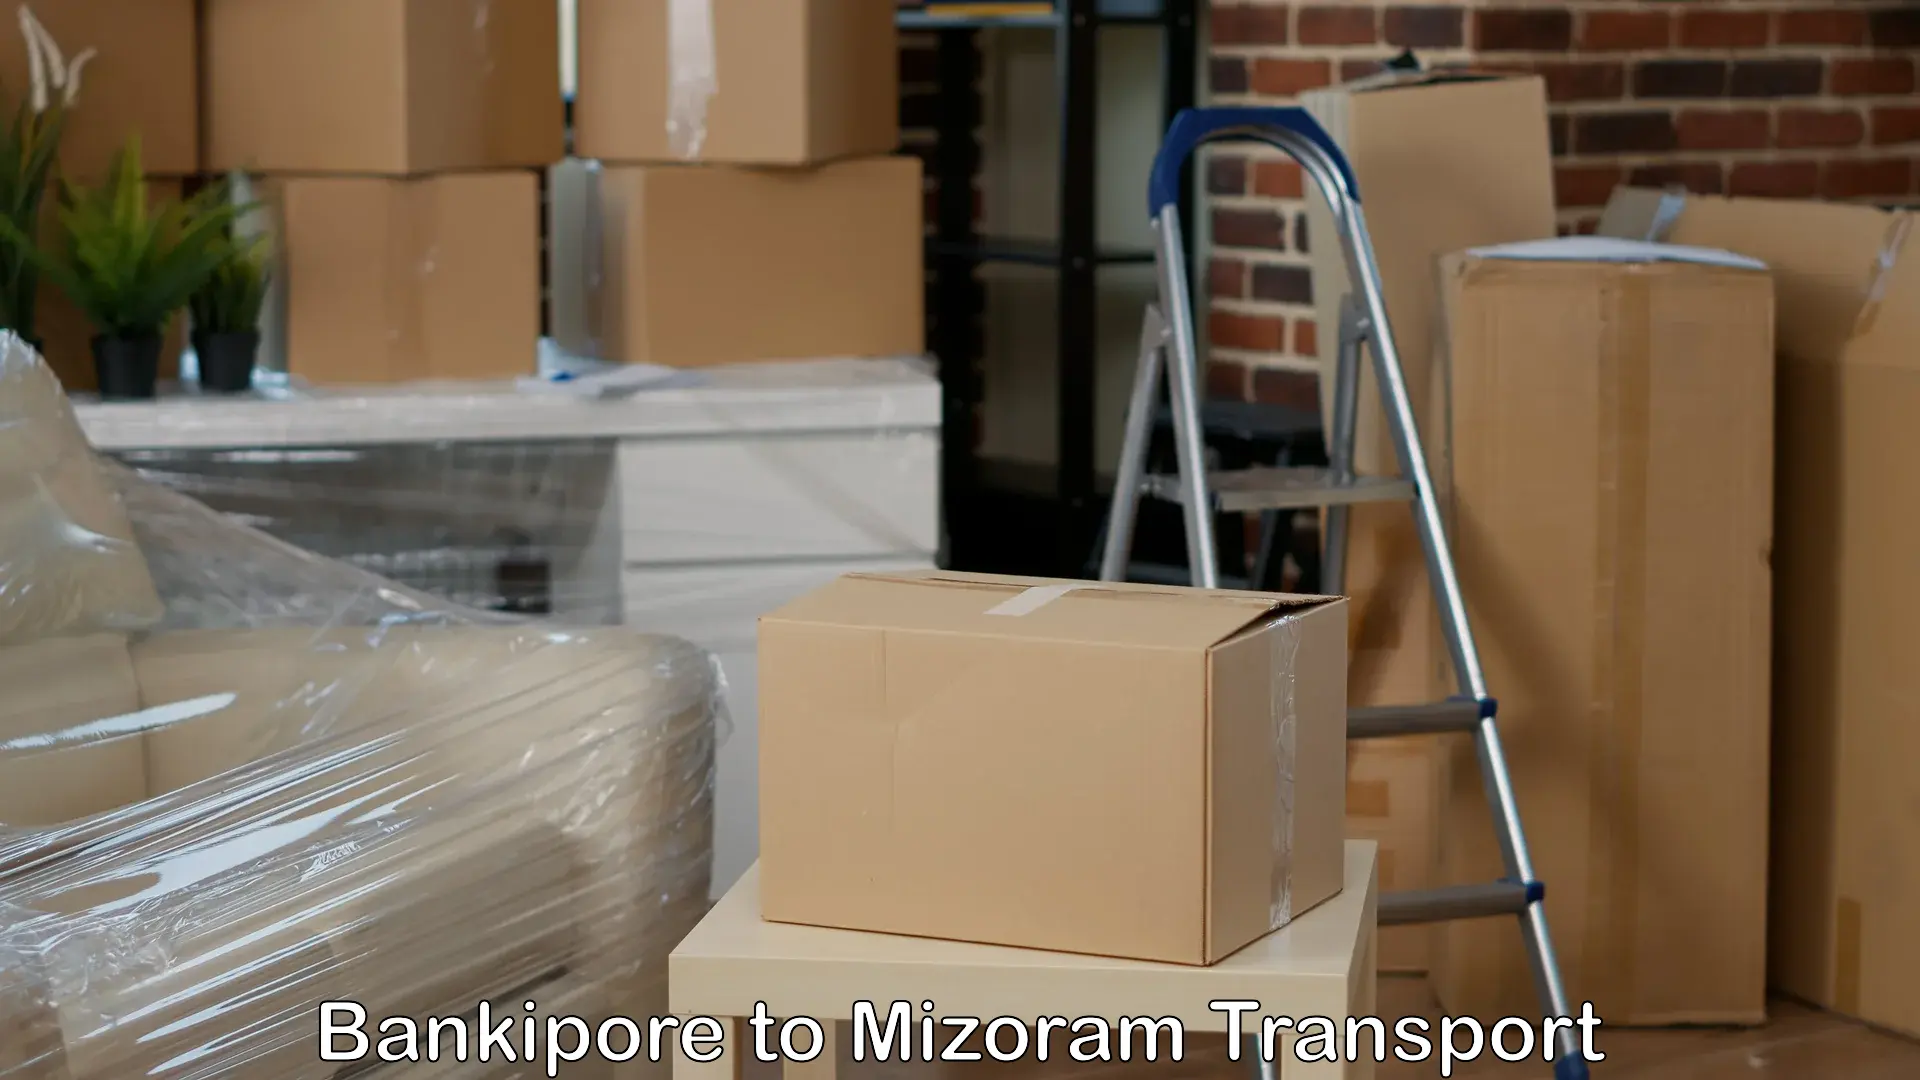 Transport shared services Bankipore to Mizoram